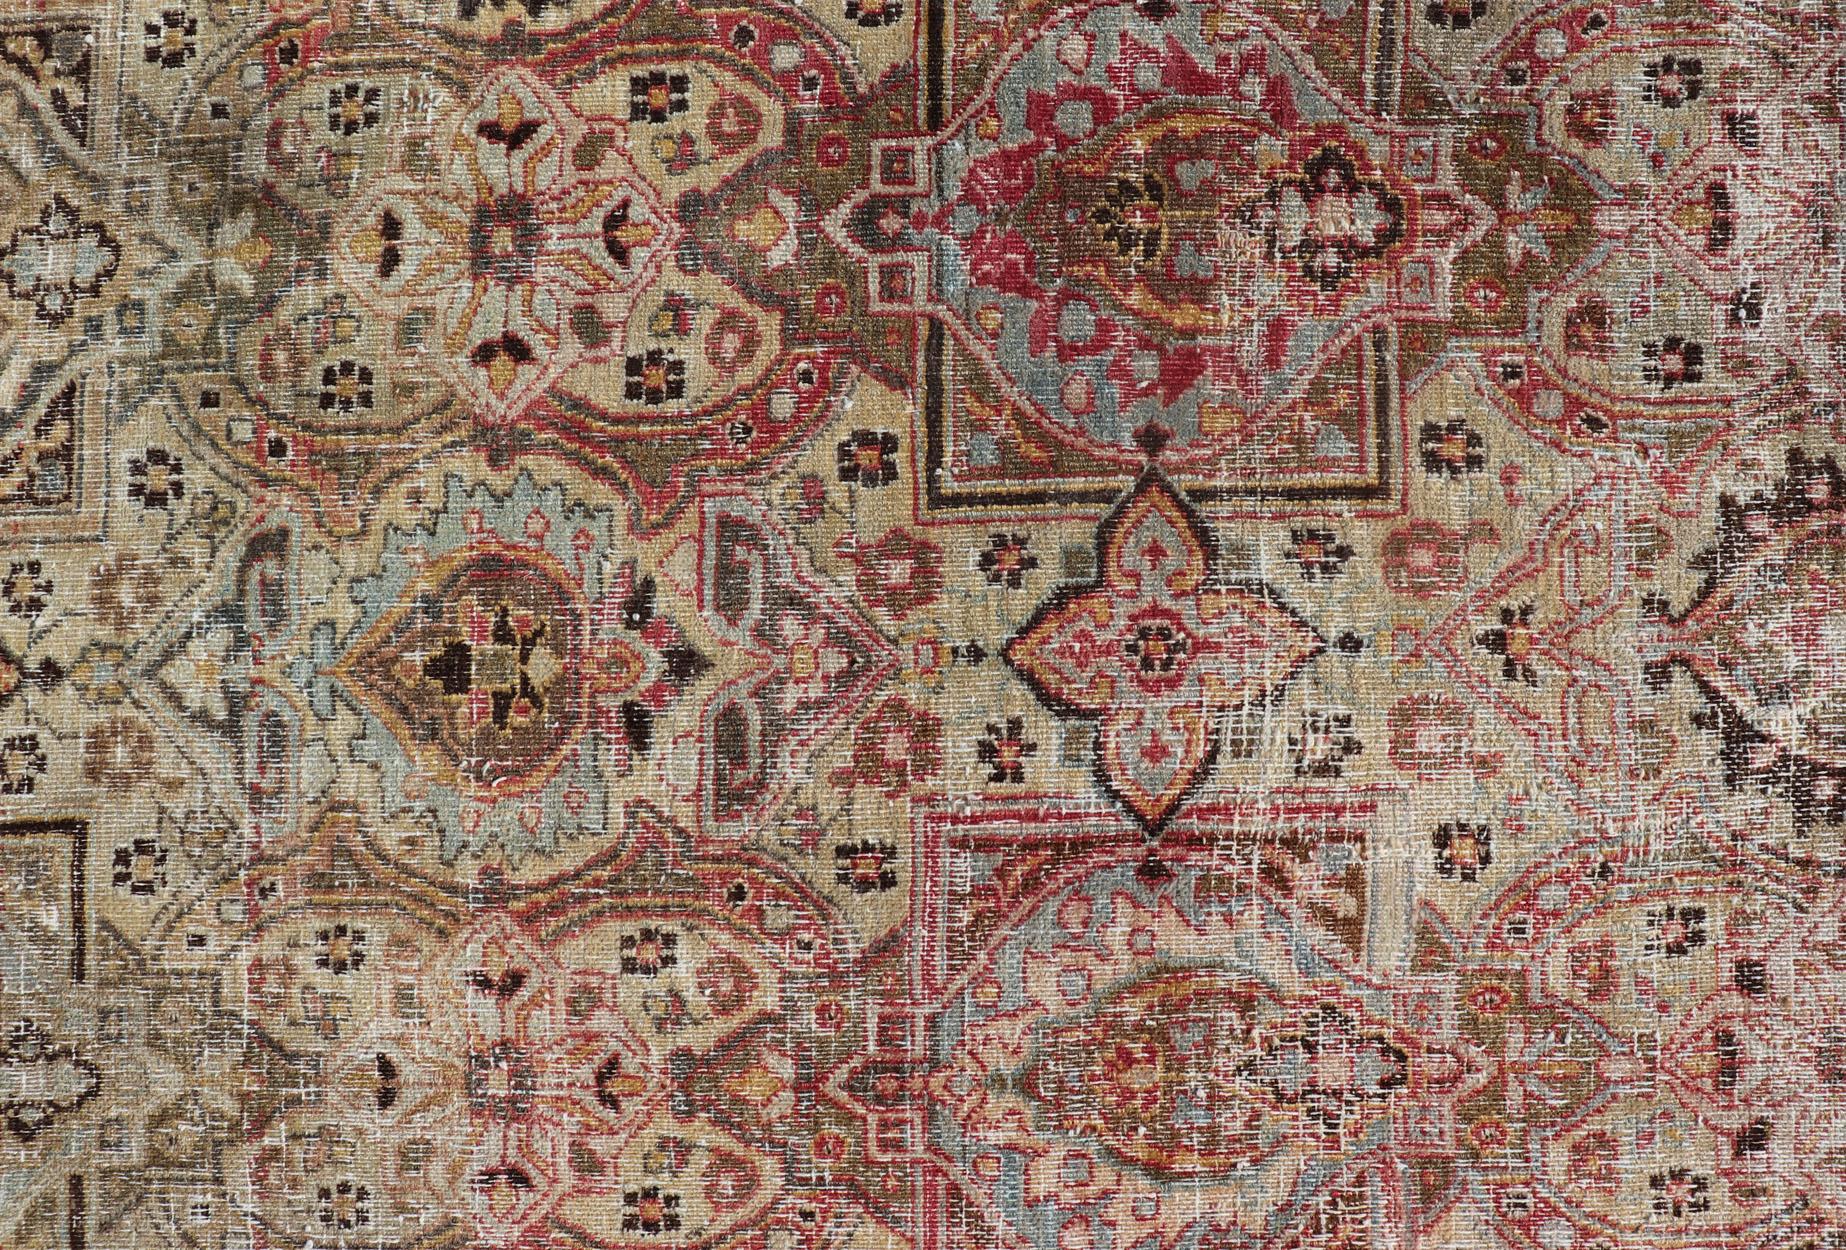  Antique Persian Khorassan Rug with Palmettes, Geometric Flowers in Soft Tones For Sale 10